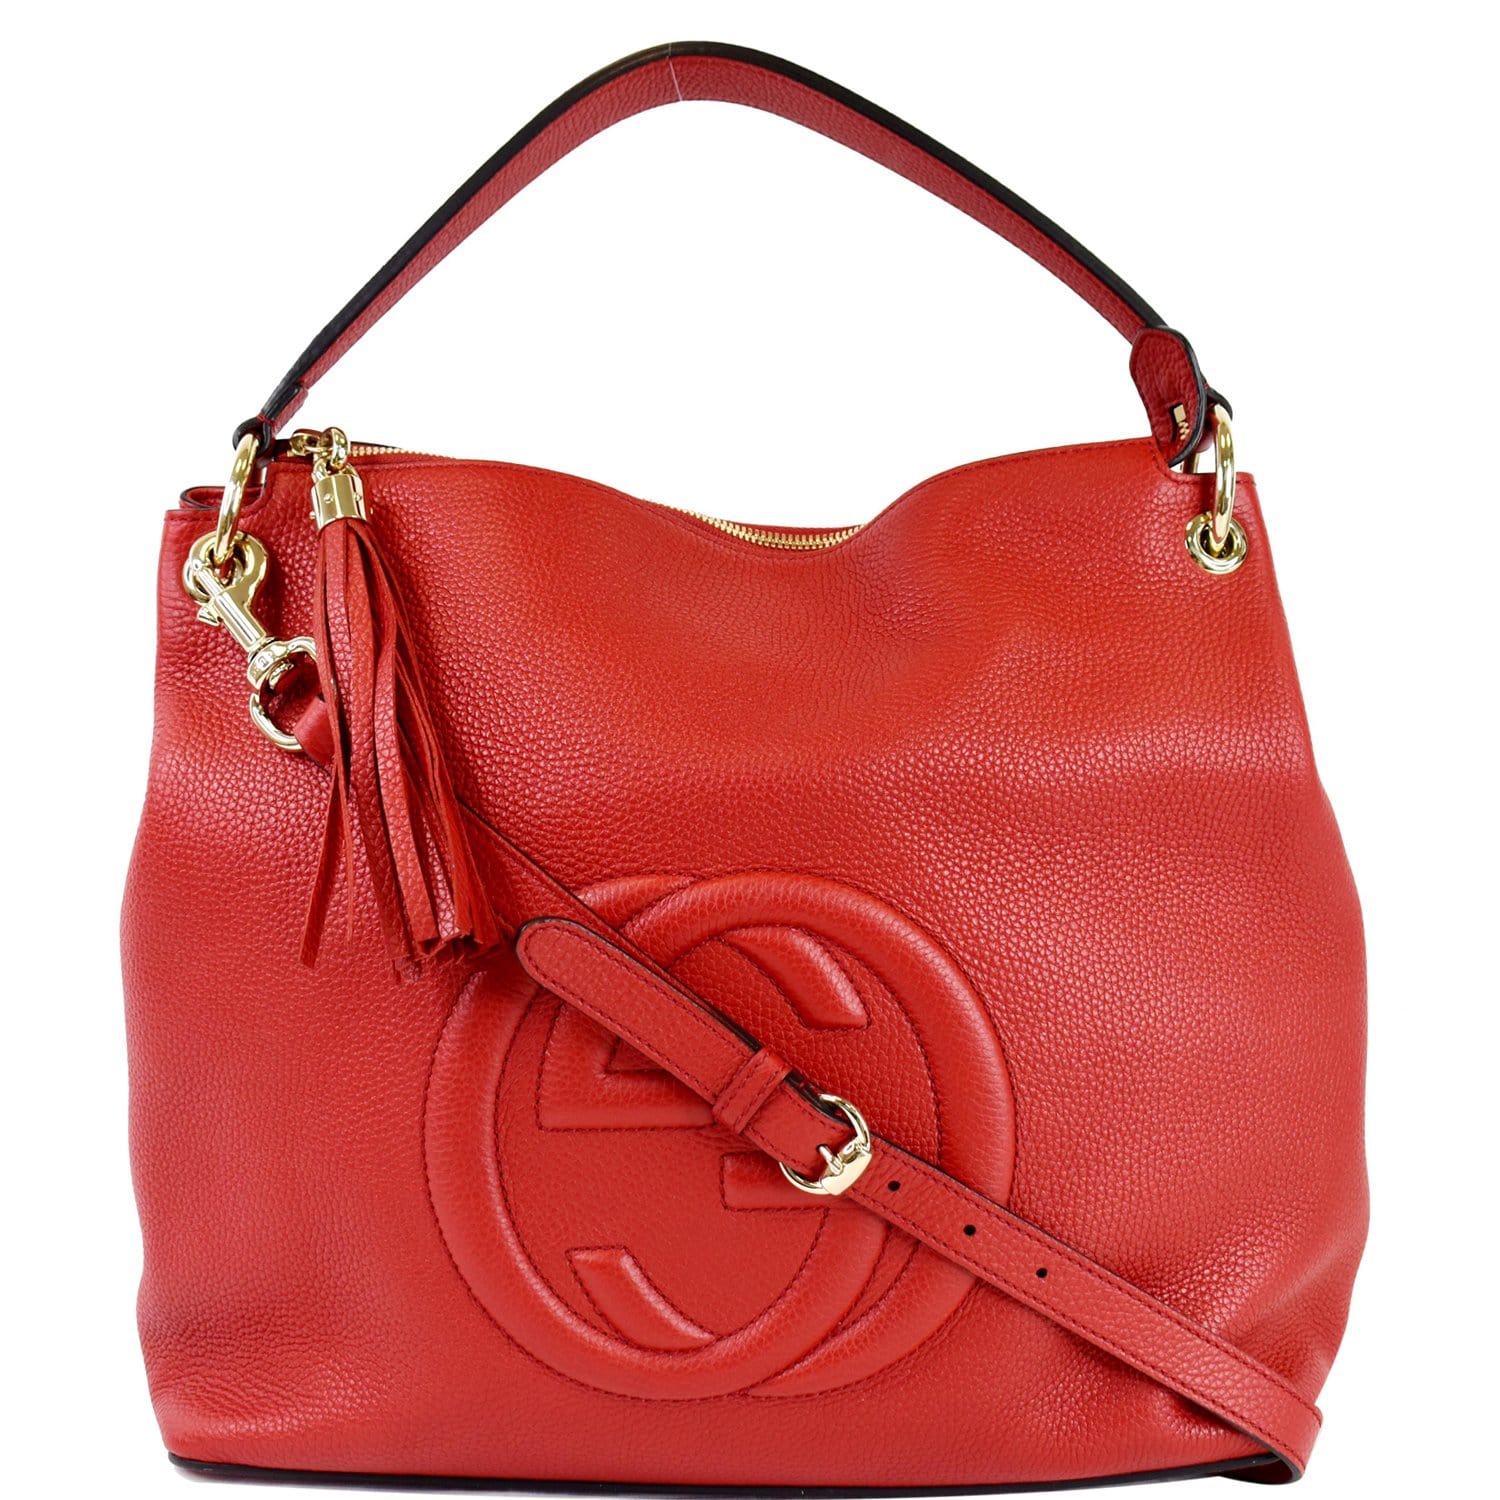 Gucci Soho Large Pebbled Leather Bag Red